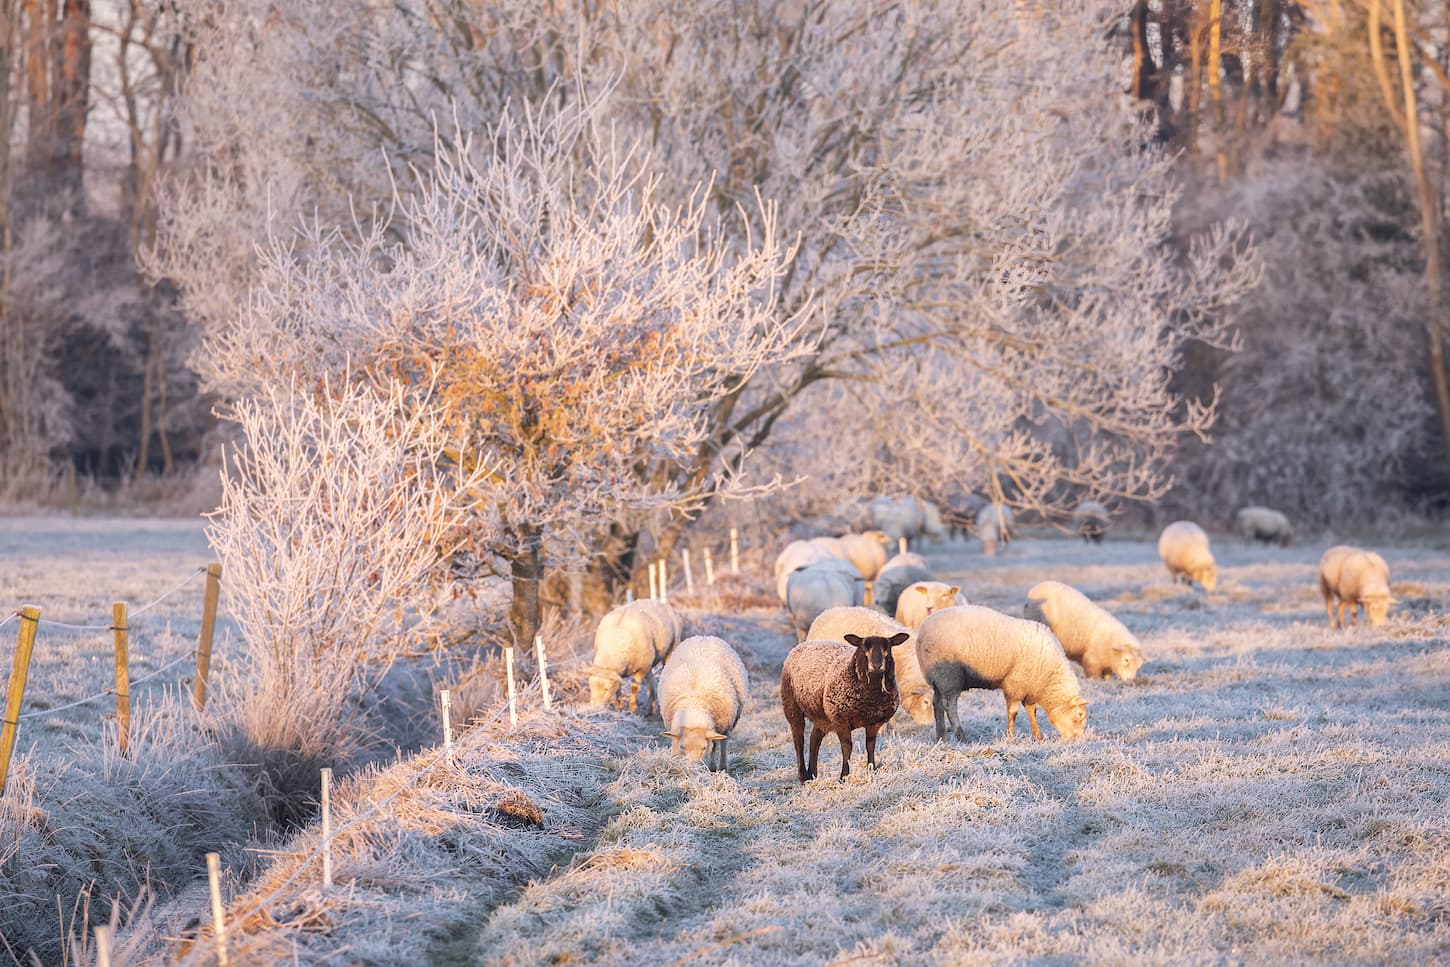 An image of sheeps grazing in a snowy area.